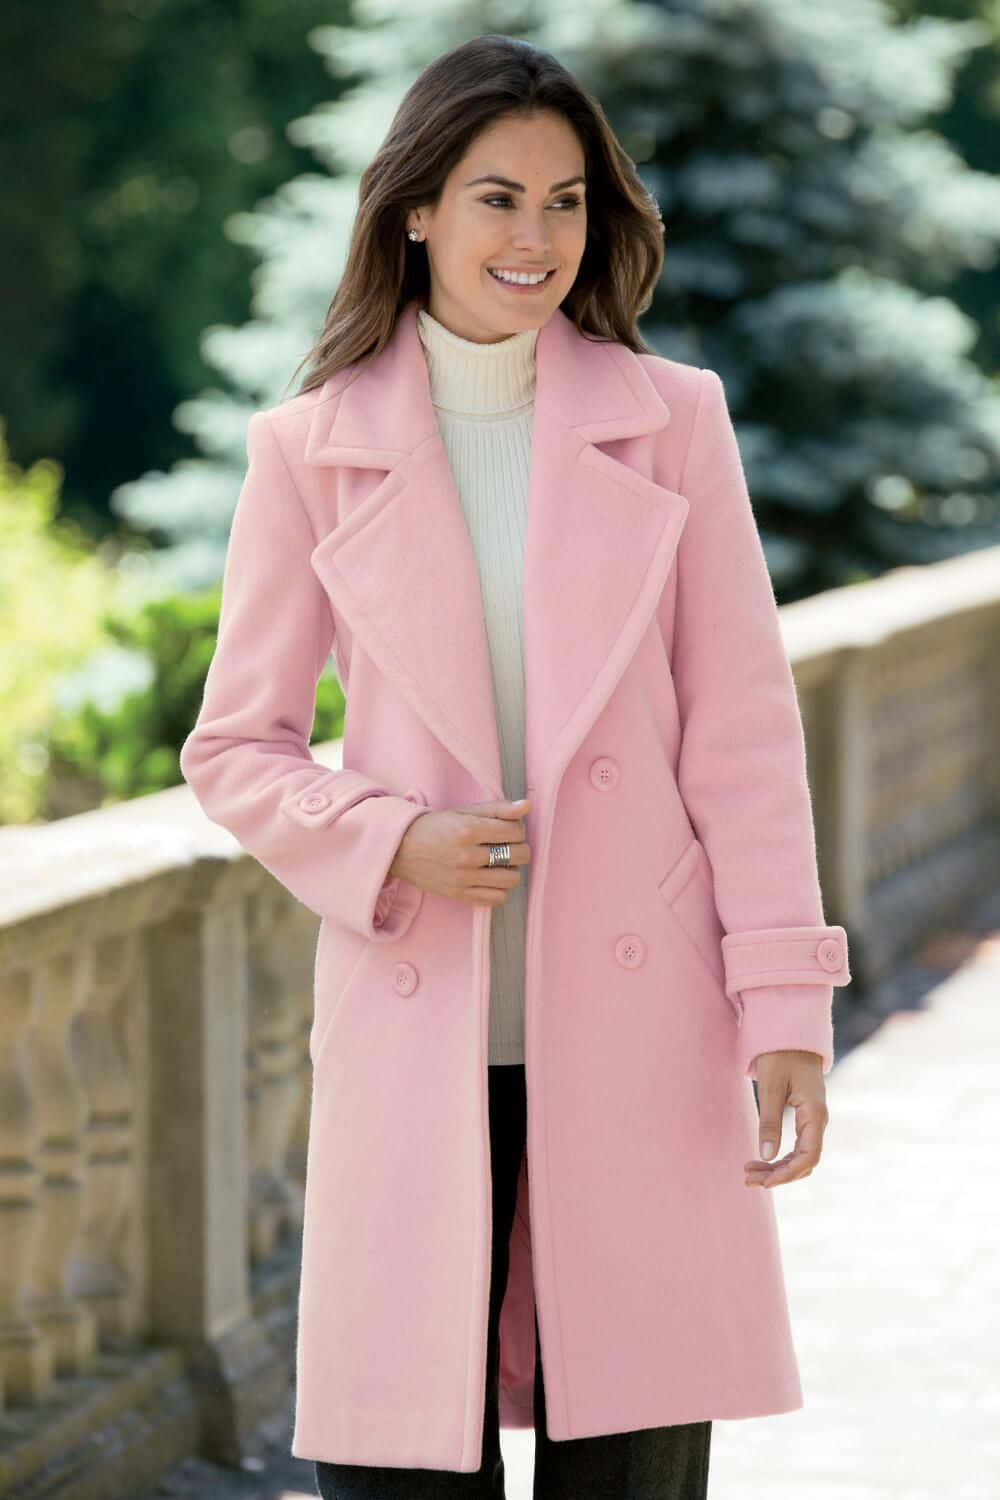 Chic young woman in a stylish pink coat Wallpaper